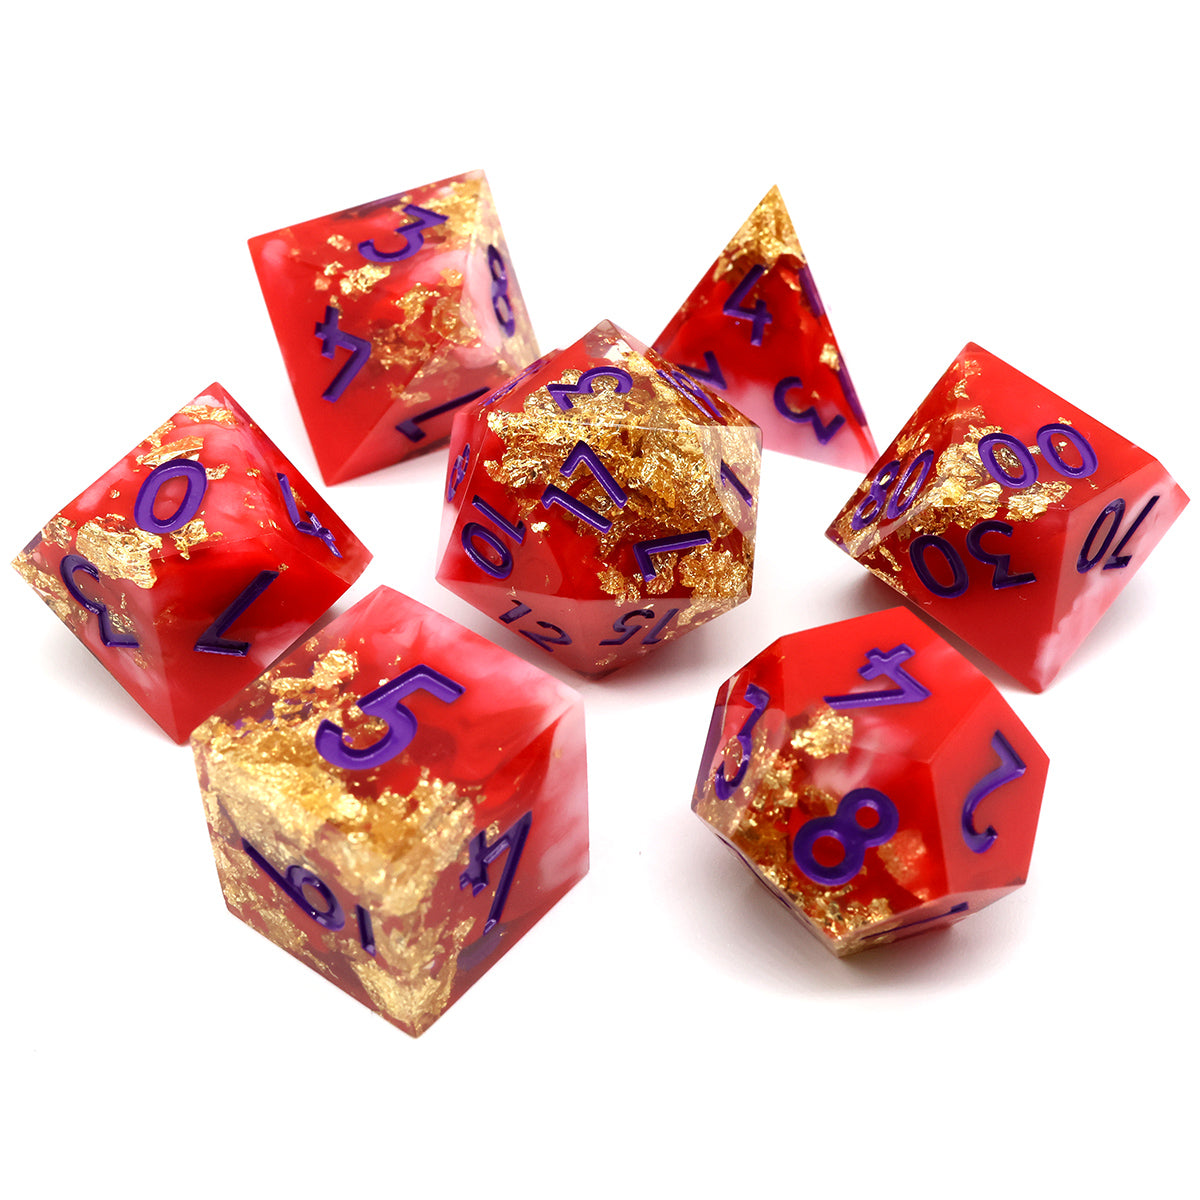 sharp edge dnd, TTRPG dice sets for role playing games, dice goblin collectors